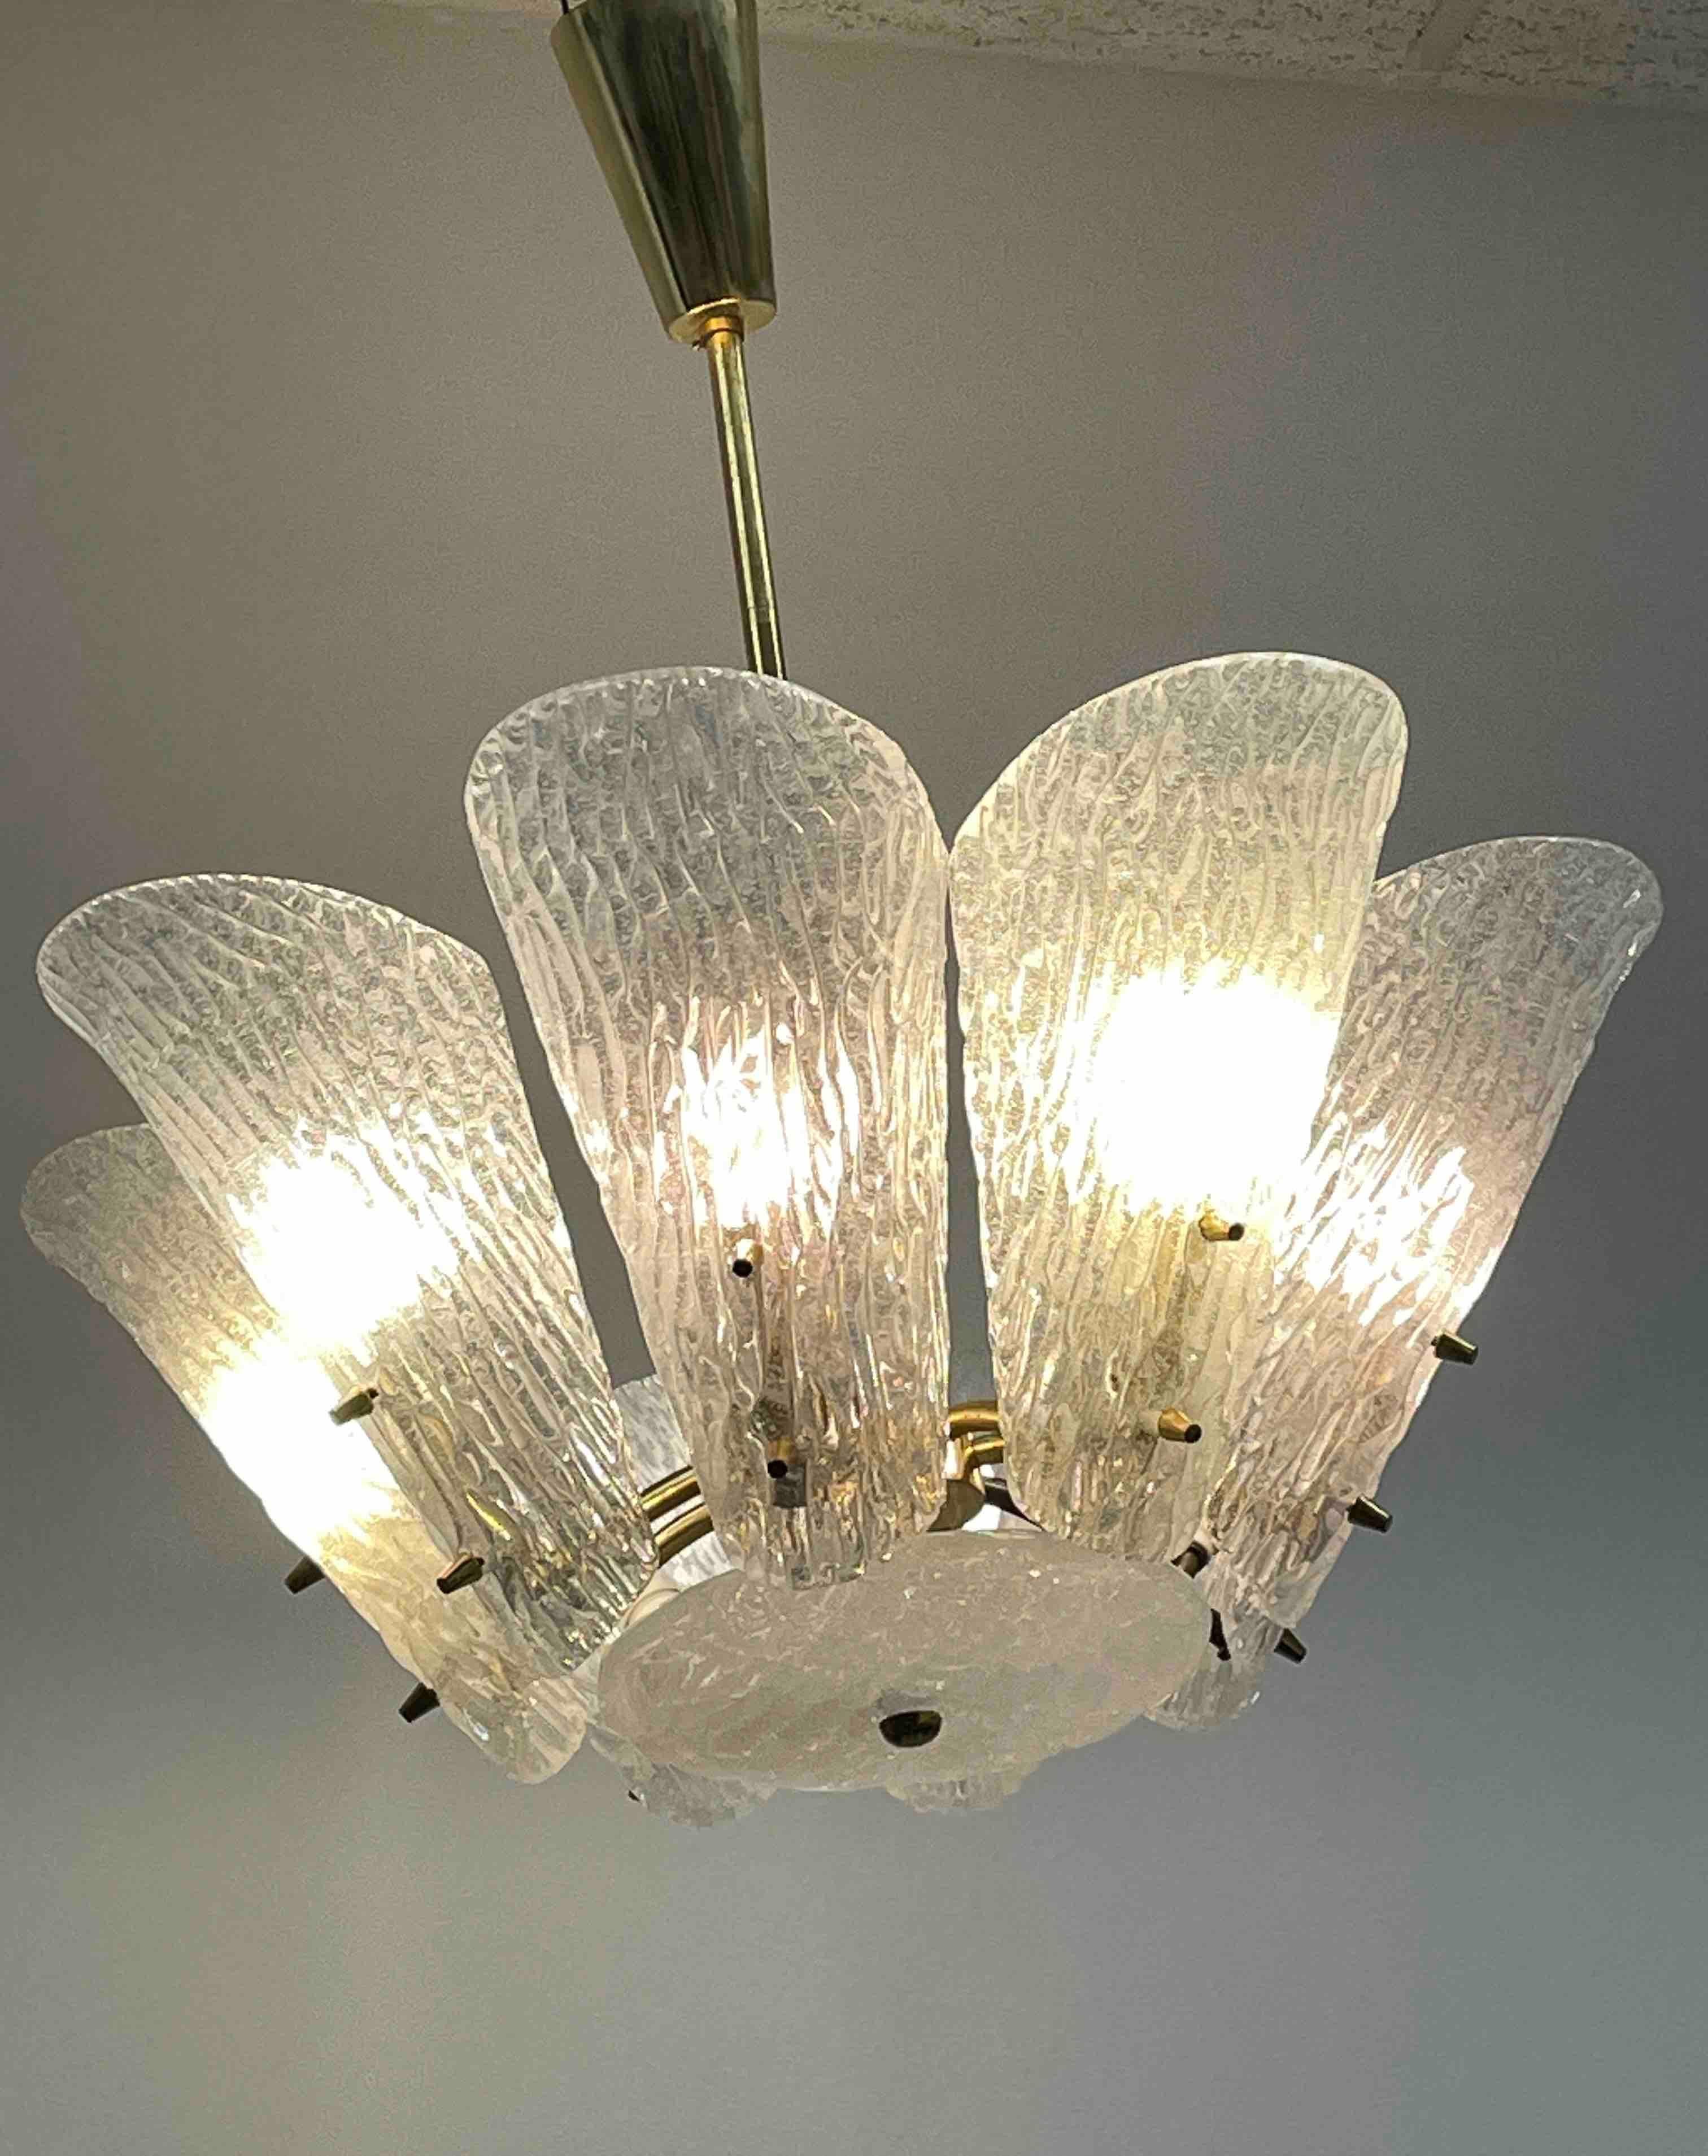 Beautiful and rare chandelier or pendant light by Kalmar Vienna, Austria. An original mid-century vintage piece manufactured in the 1950s. It is made of brass and heavy glass. The fixture requires eight European E14 / 110 Volt Candelabra bulbs, each